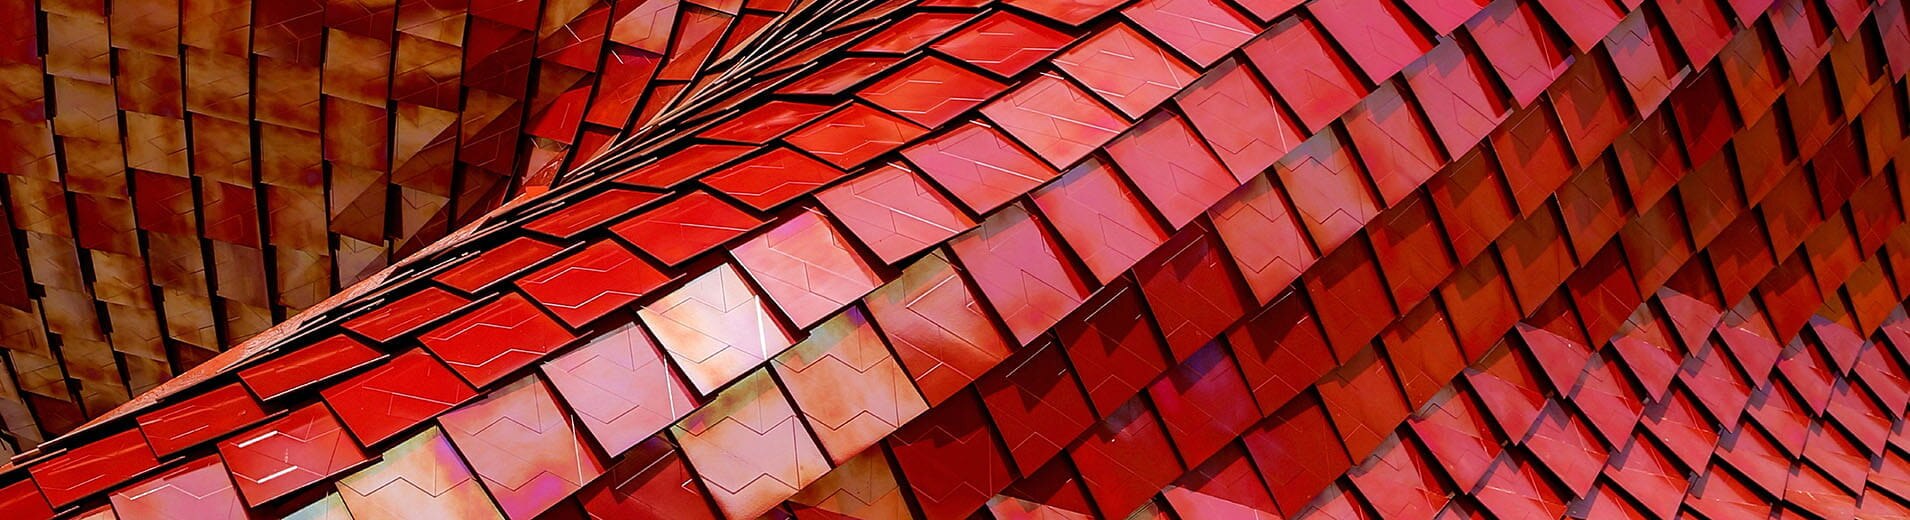 Abstract_Architectural_Red_Wave_P_0056_1910x520